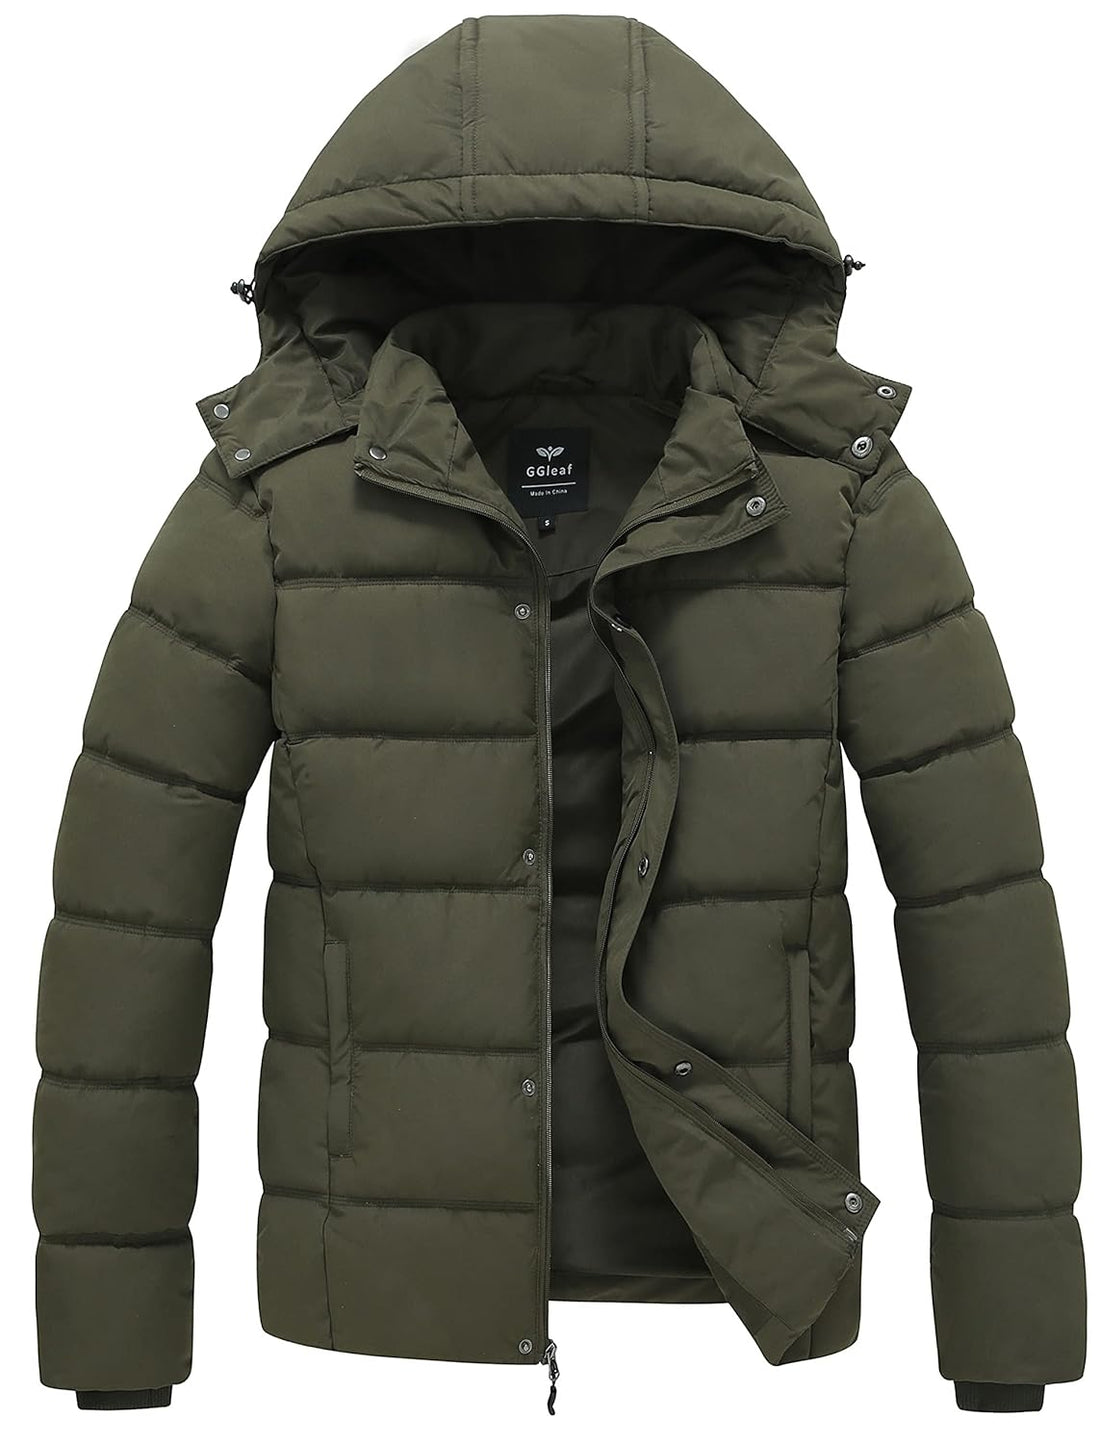 GGleaf Men's Hooded Winter Coat Warm Puffer Jacket Thicken Cotton Coat with Removable Hood, Army Green, Medium